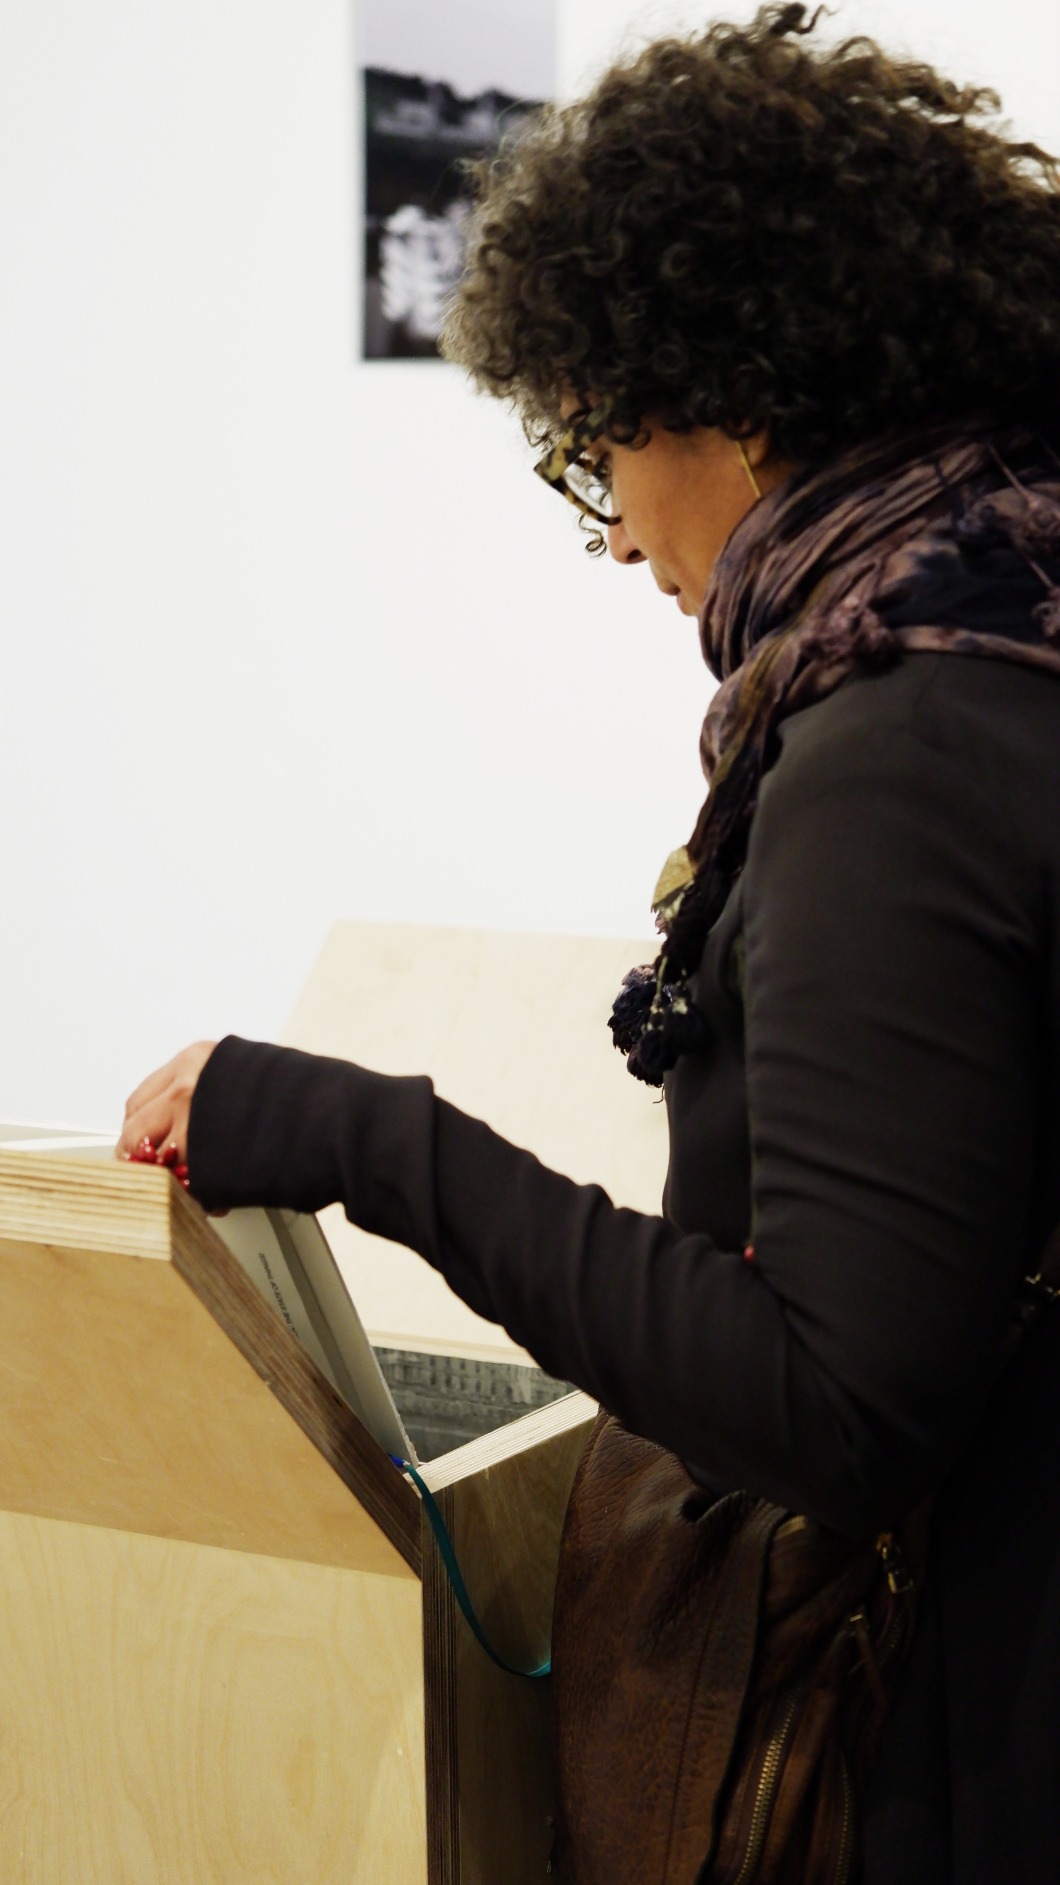 Photo of artwork fragment being engaged with by visitor. Artwork is a series of 6 timber podiums. One podium seen in this photo with woman peeking into podium interior, flipping the page of the book to open the interior.